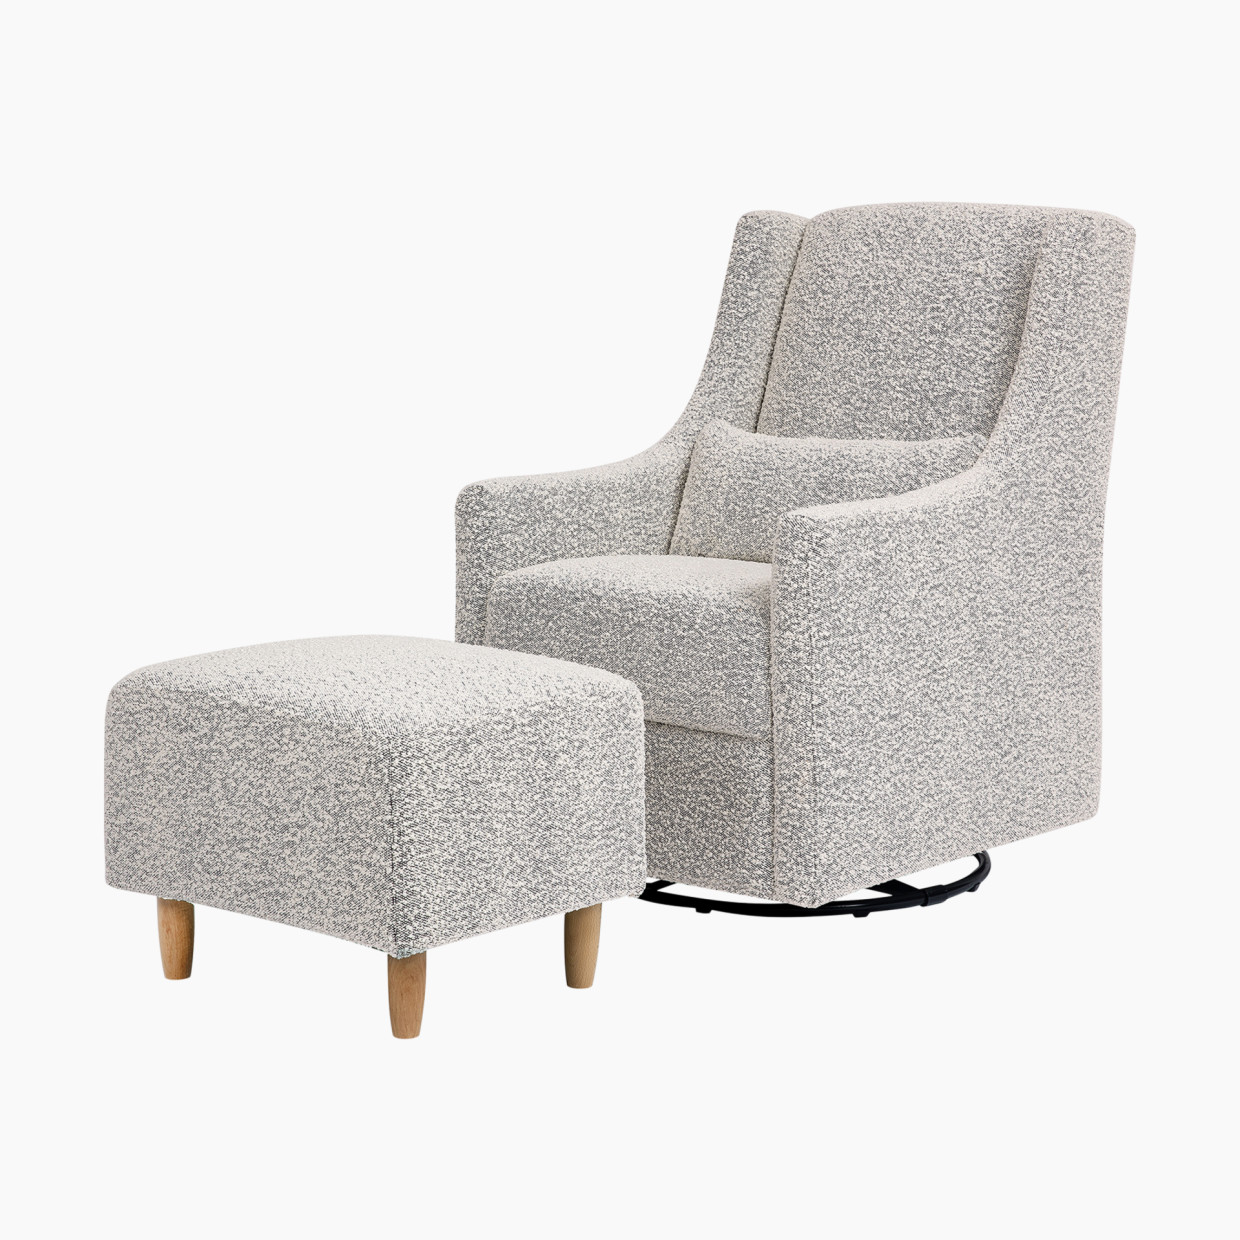 babyletto Toco Swivel Glider and Stationary Ottoman - Black/White Boucle.